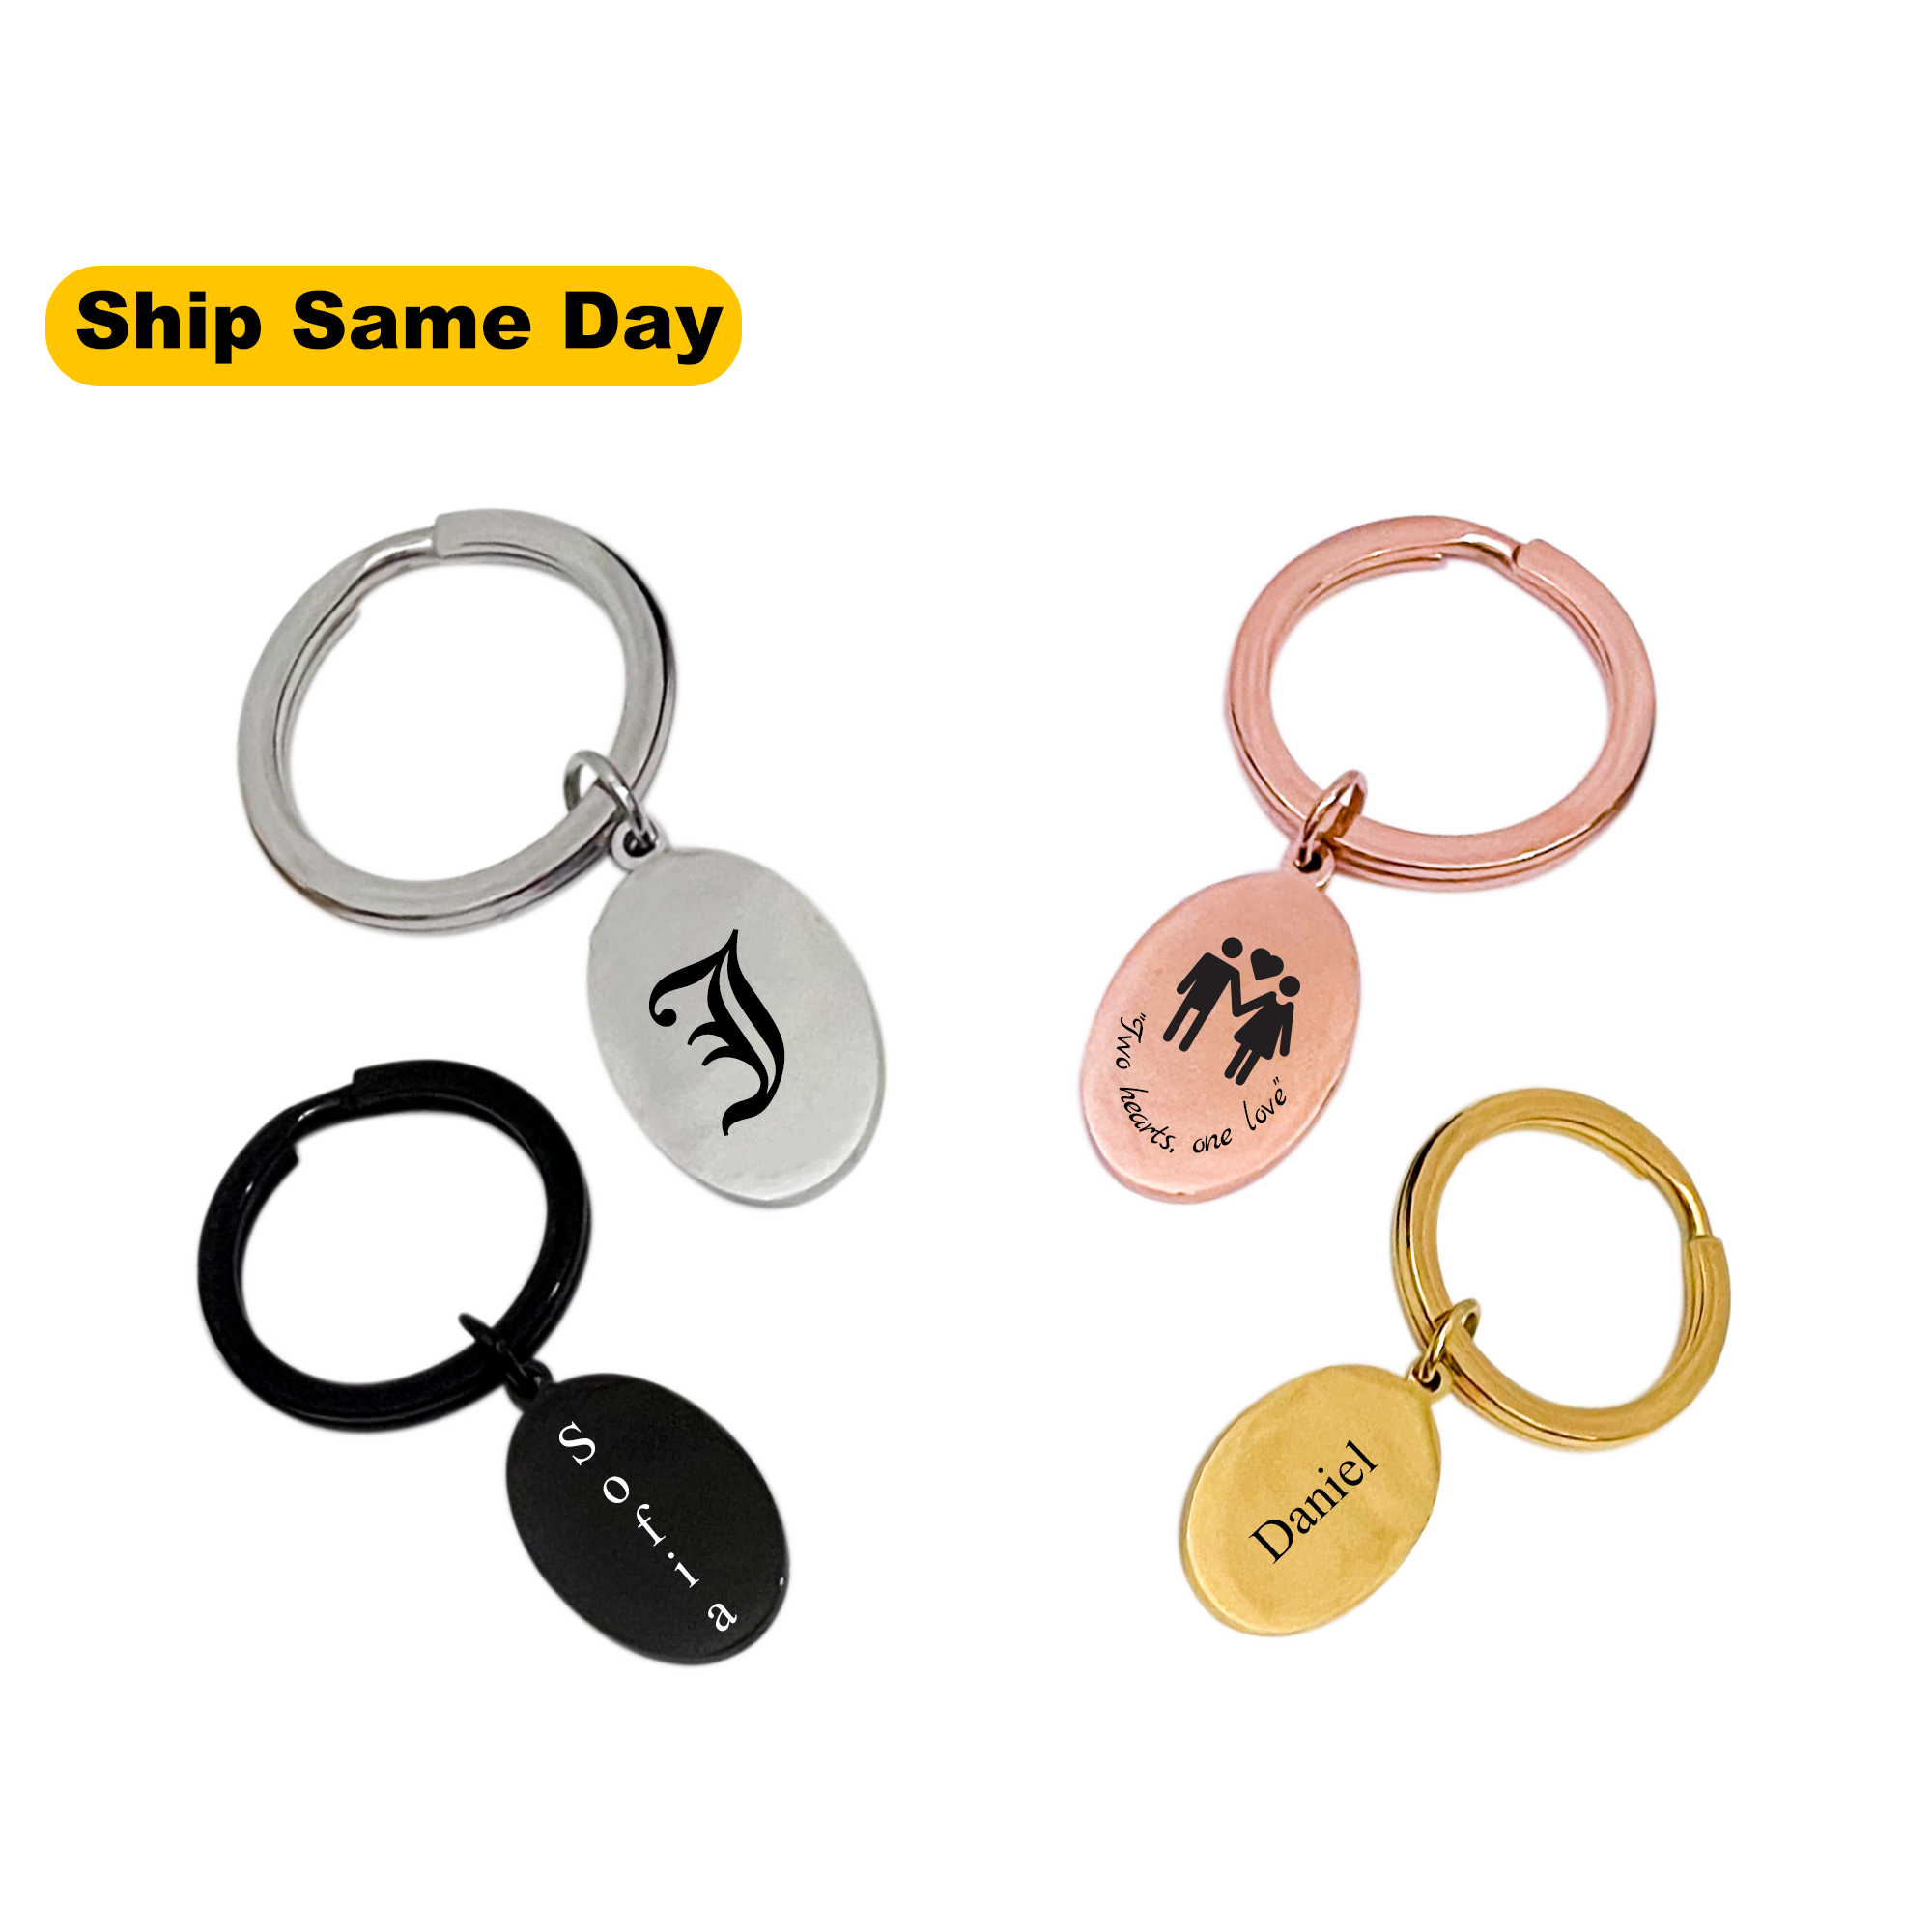 Engraved Oval Shape Keychain Gift for Her KCK 21